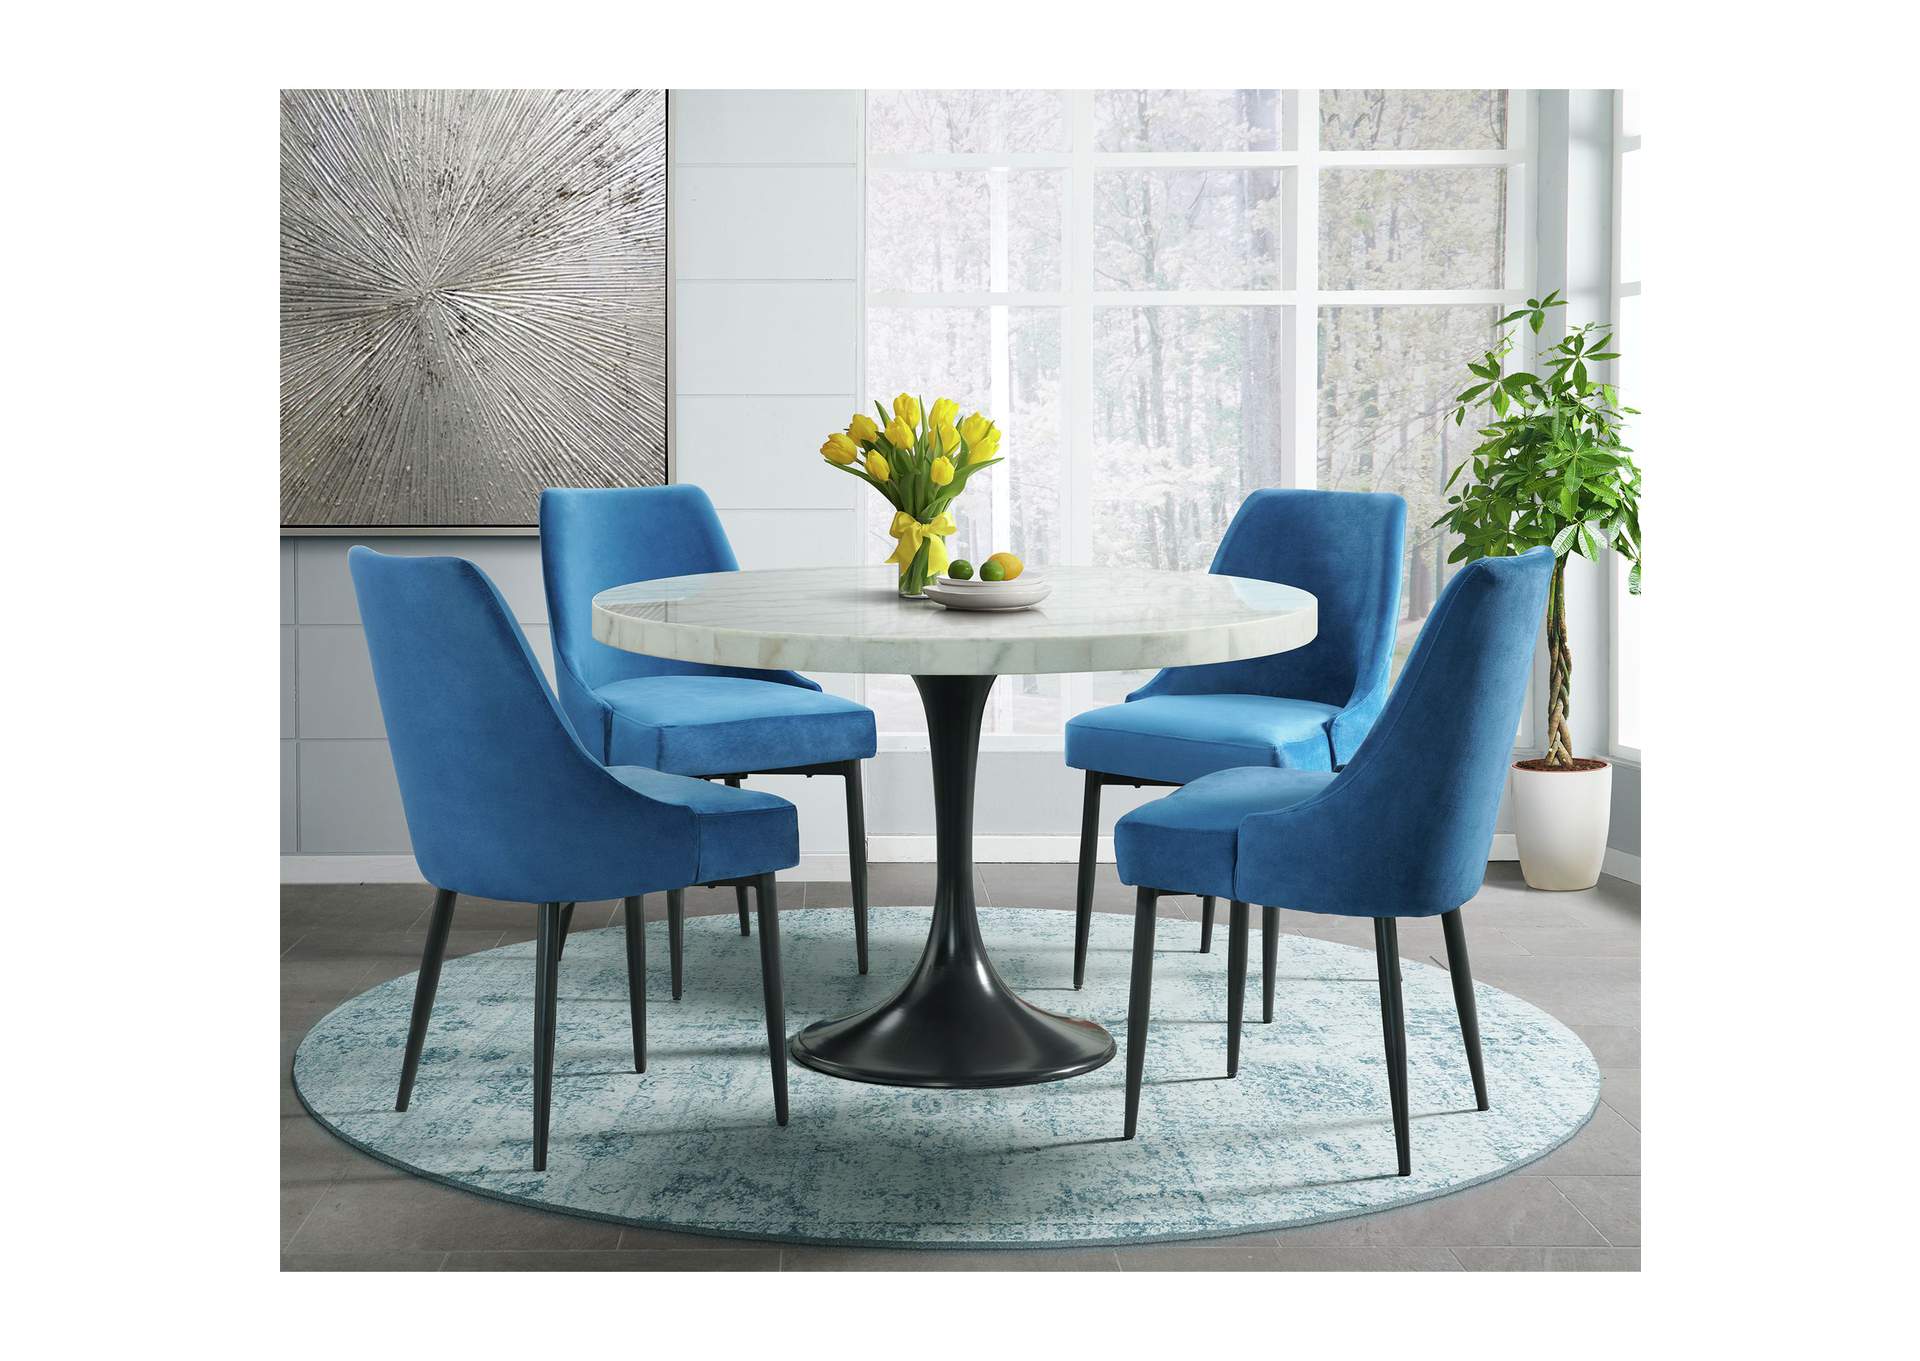 Celeste Dining Side Chair With Blue Fabric 2 Per Carton,Elements